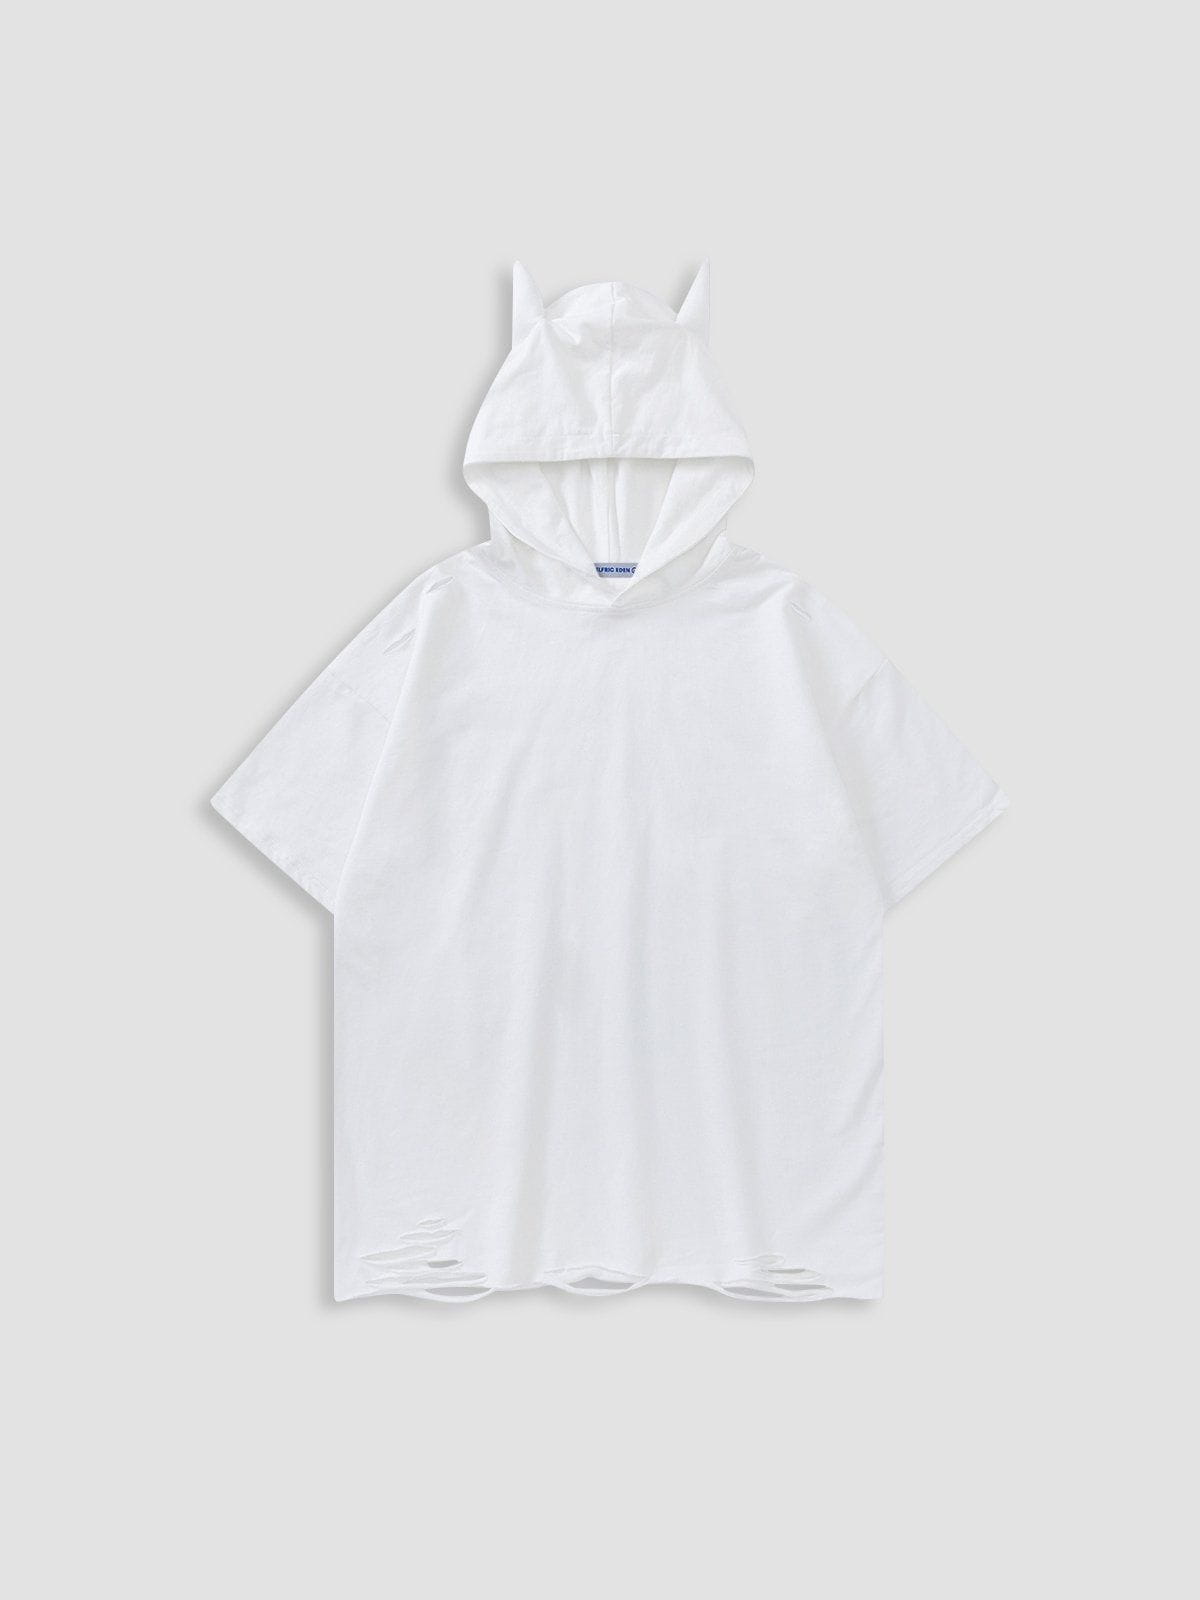 Aelfric Eden Horn Design Washed Hooded Tee